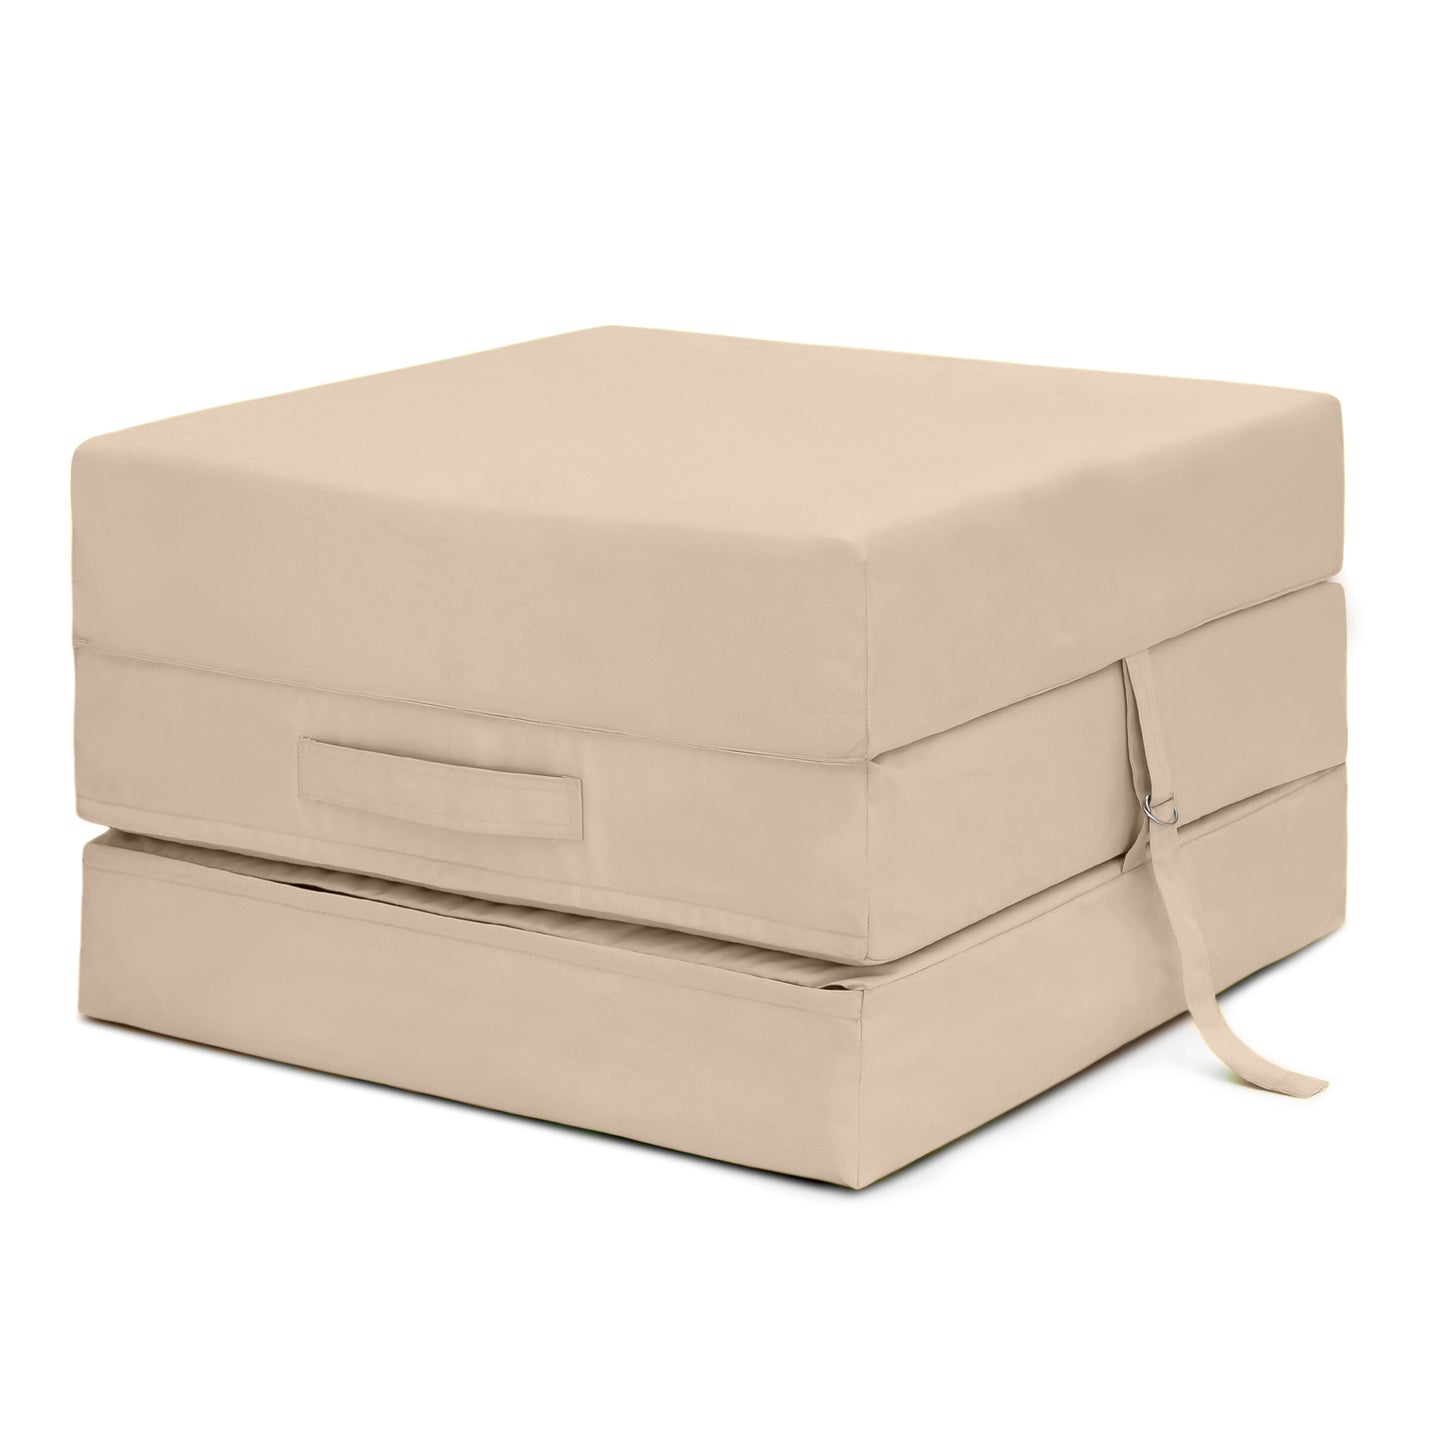 Loft 25 Water Resistant Fold-Out Z Bed Cube Mattress